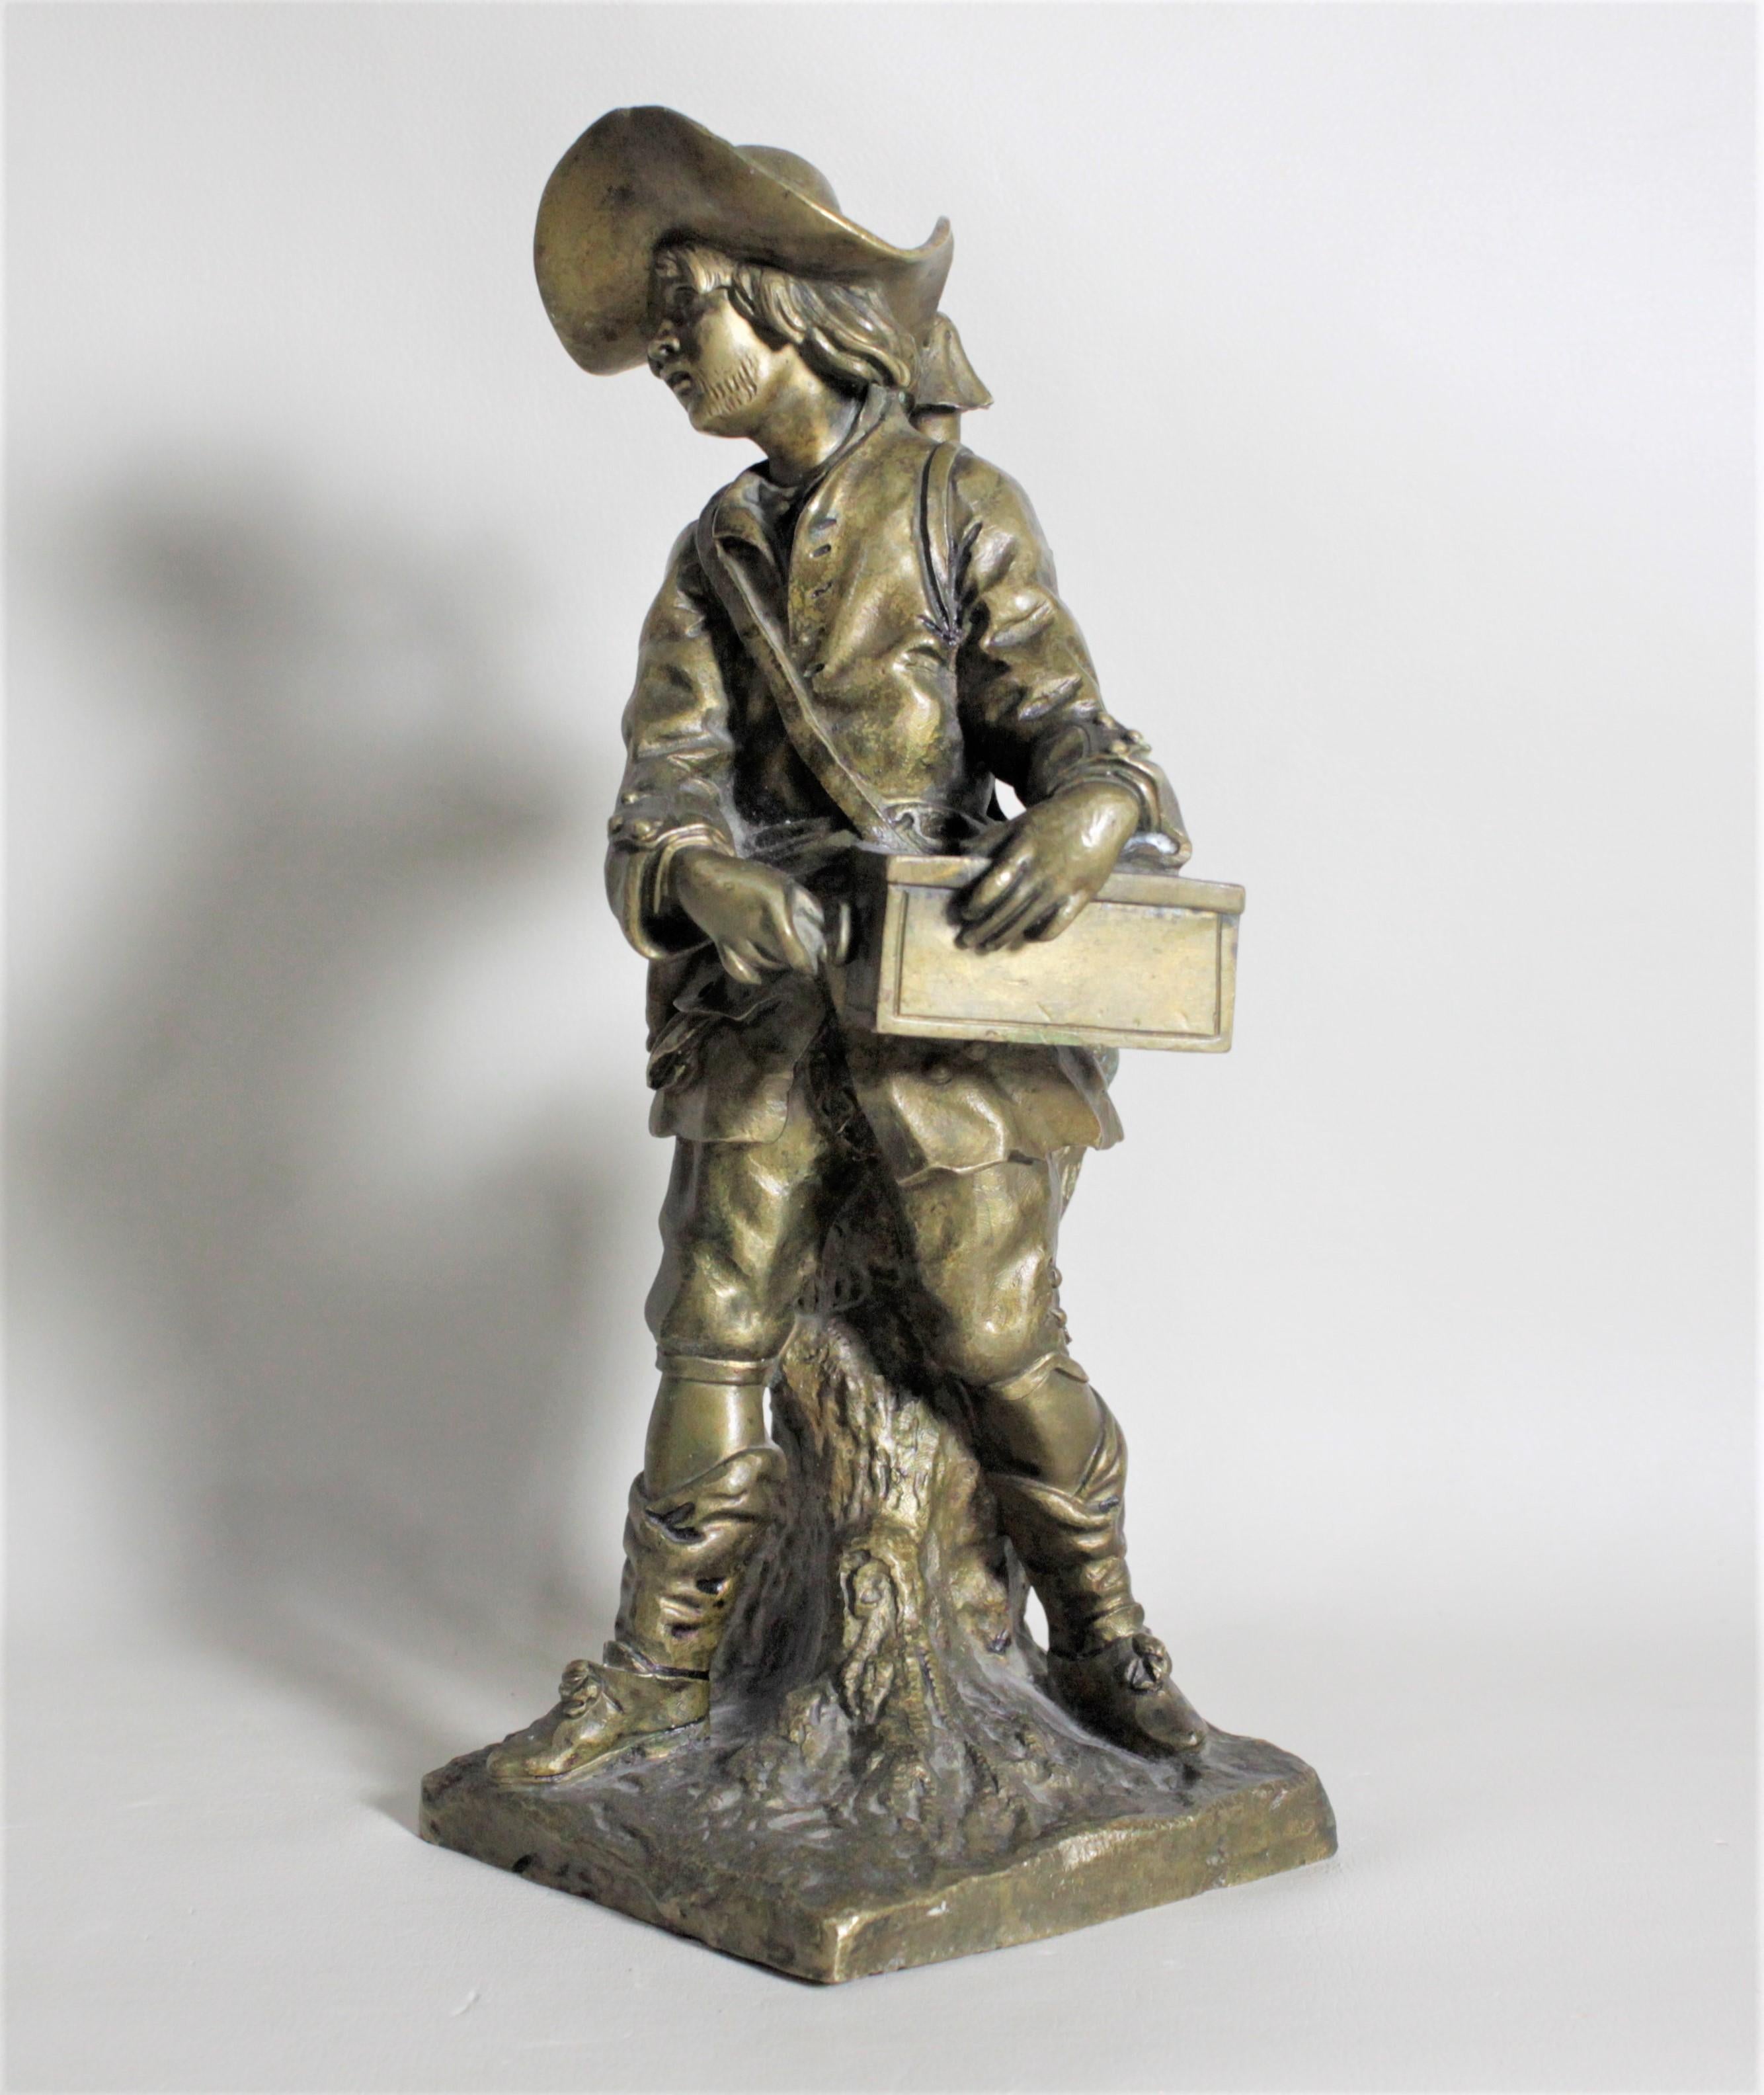 This well executed antique bronze sculpture is presumed to have been made in France in circa 1895 in the period Victorian style. This bronze may have an illegible signature on the base, but the maker is being regarded as 'Unknown'. This highly